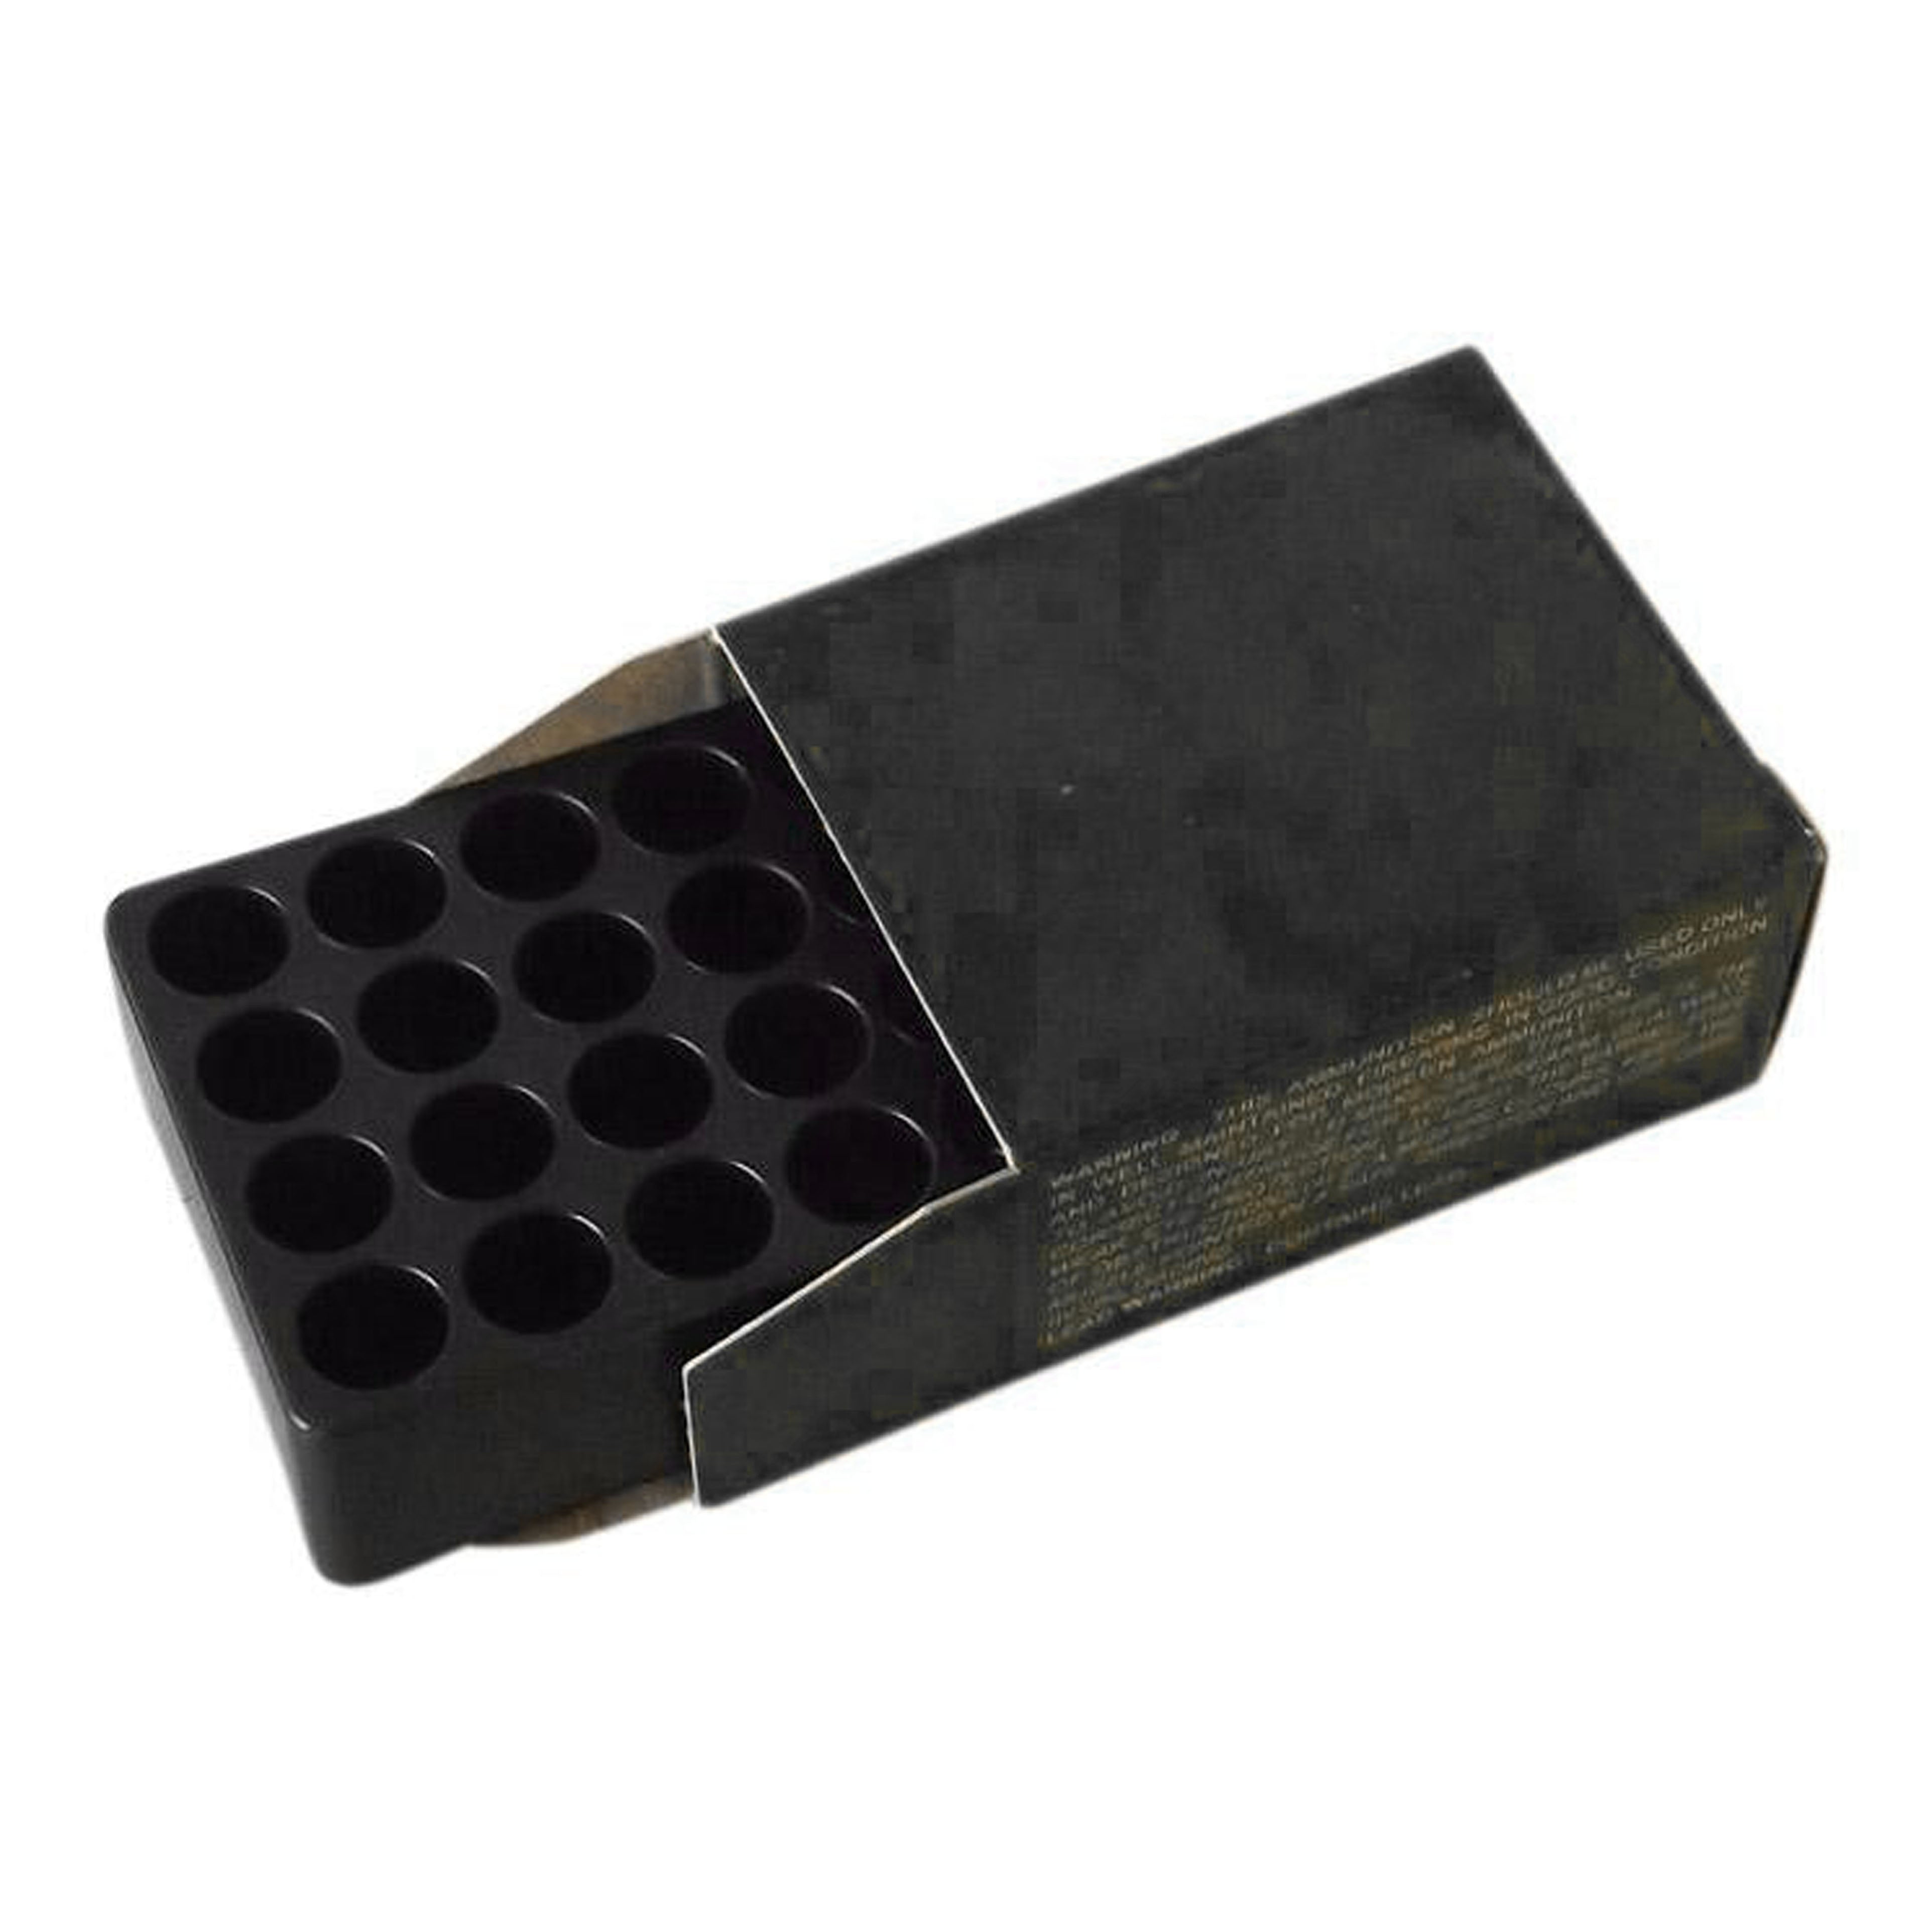 #14 Ammunition Packaging Box & Tray Combos for .380, 9mm, or .38 Super - 20 Round Capacity